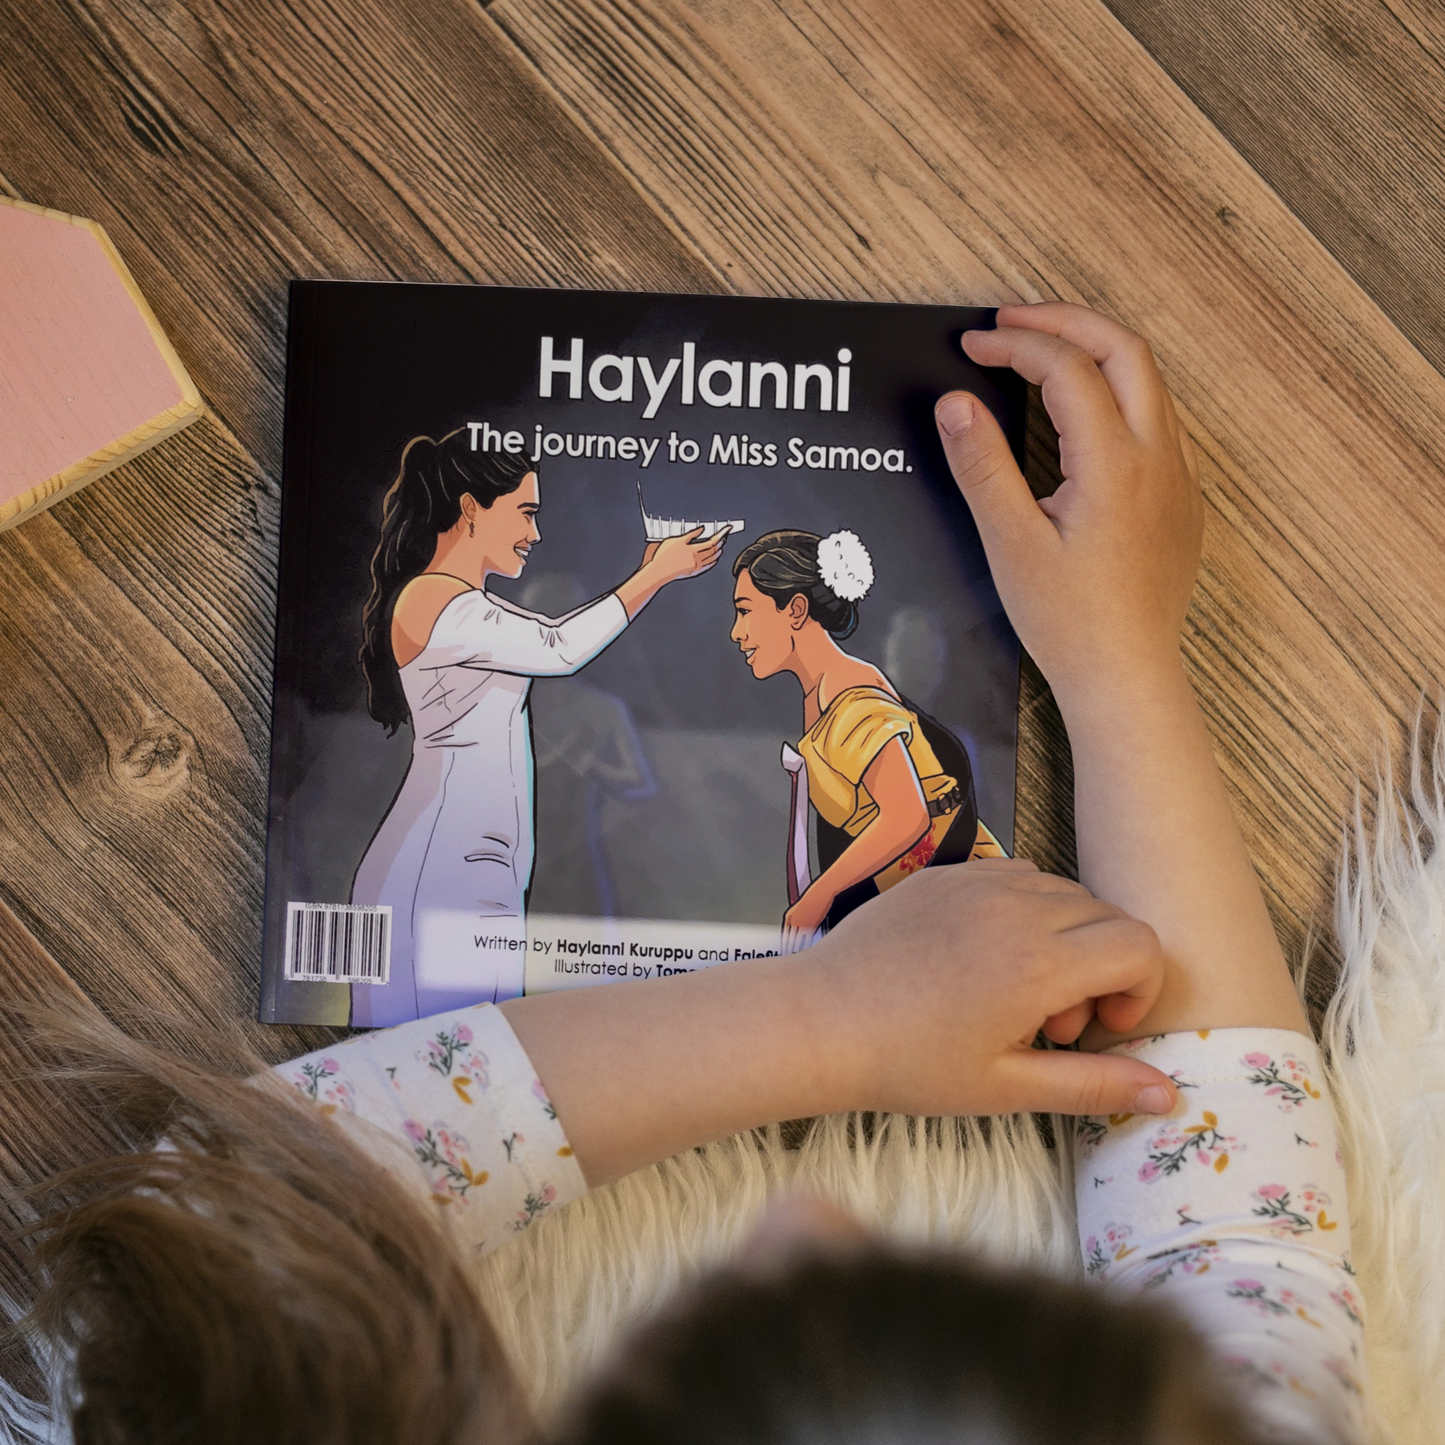 A young child reading a bilingual Samoan children's book titled "Haylanni: The Journey to Miss Samoa". The book is an illustration of a Fonoifafo Miss Samoa 2019-2021 crowning Haylanni as the new reigning Miss Samoa 2022-2023.